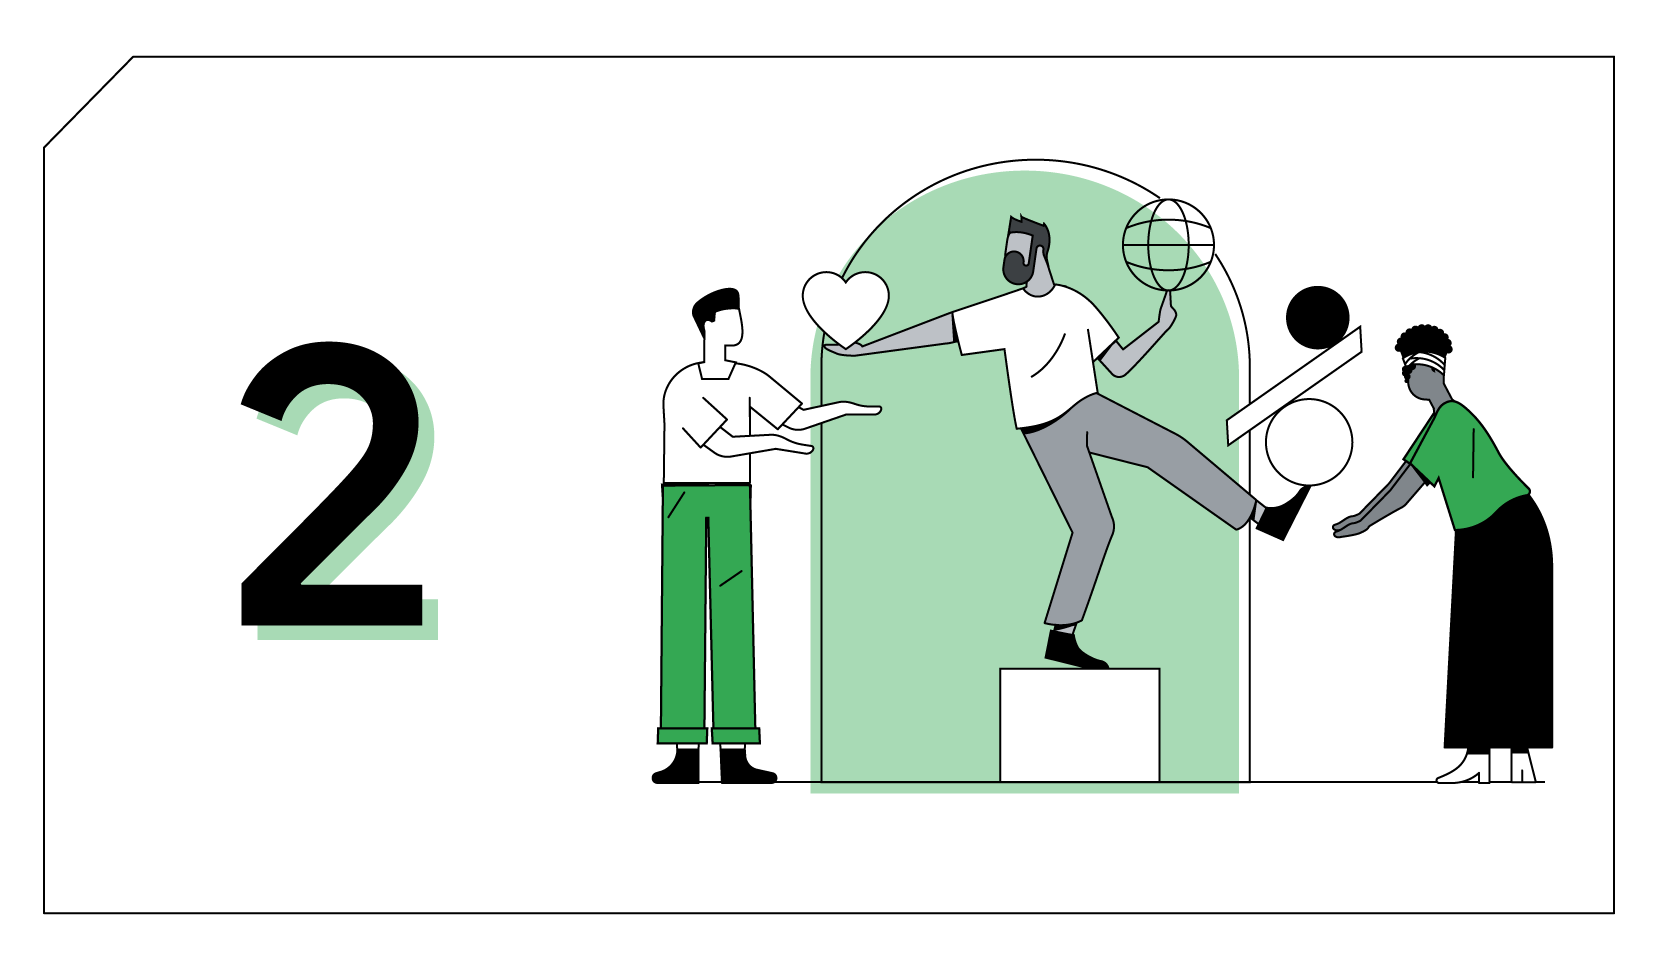 Chapter 2. A man of colour stands on a white block and balances objects on his hands and left foot. An Asian man and a Black woman stand on each side and prepare to catch the objects.